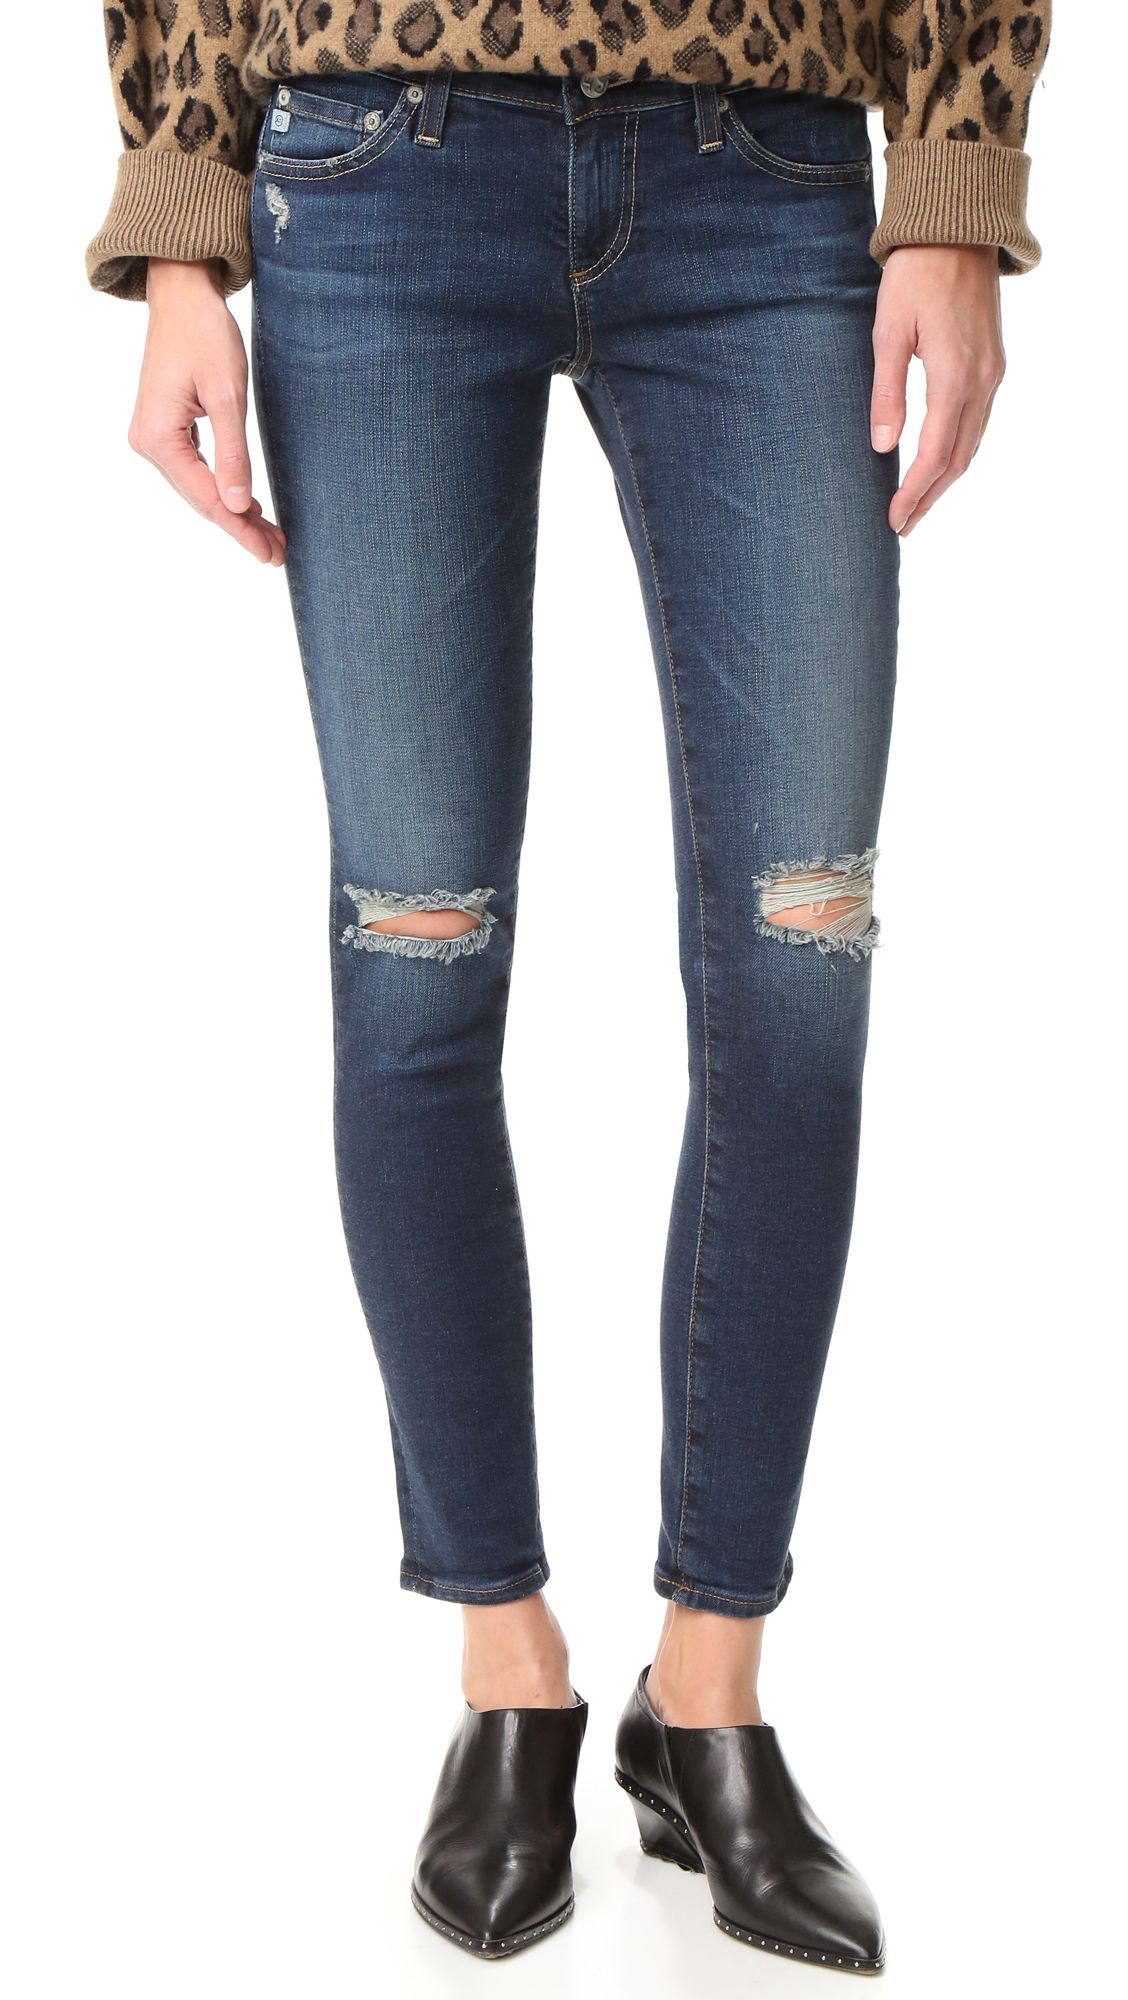 The Legging Ankle Jeans | Shopbop